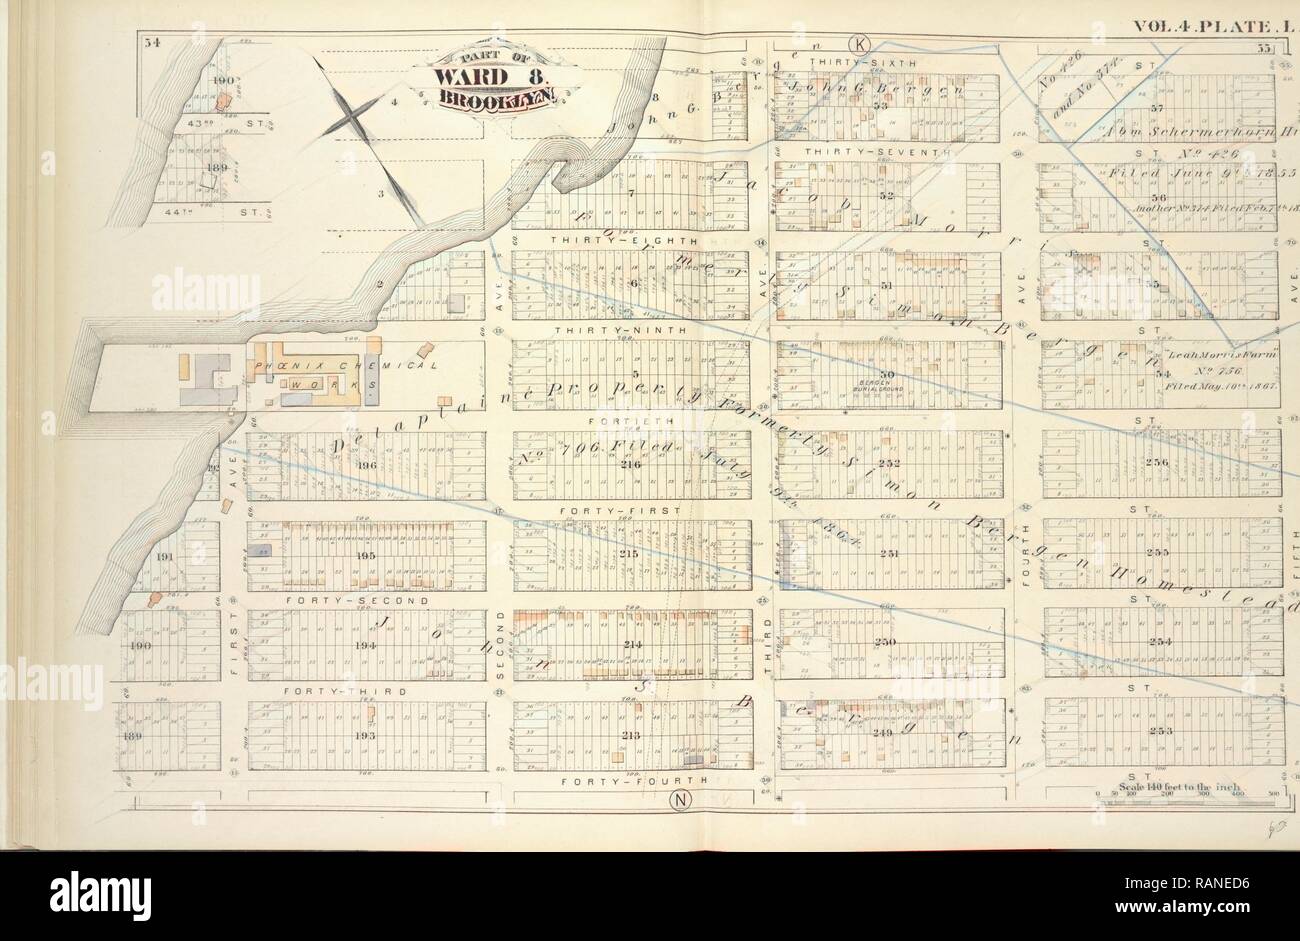 Vol. 4. Plate, L. Map bound by Thirty-Sixth, Fifth Ave., Forty-Fourth St., Gowanus Bay, Including Third St., Forty- reimagined Stock Photo